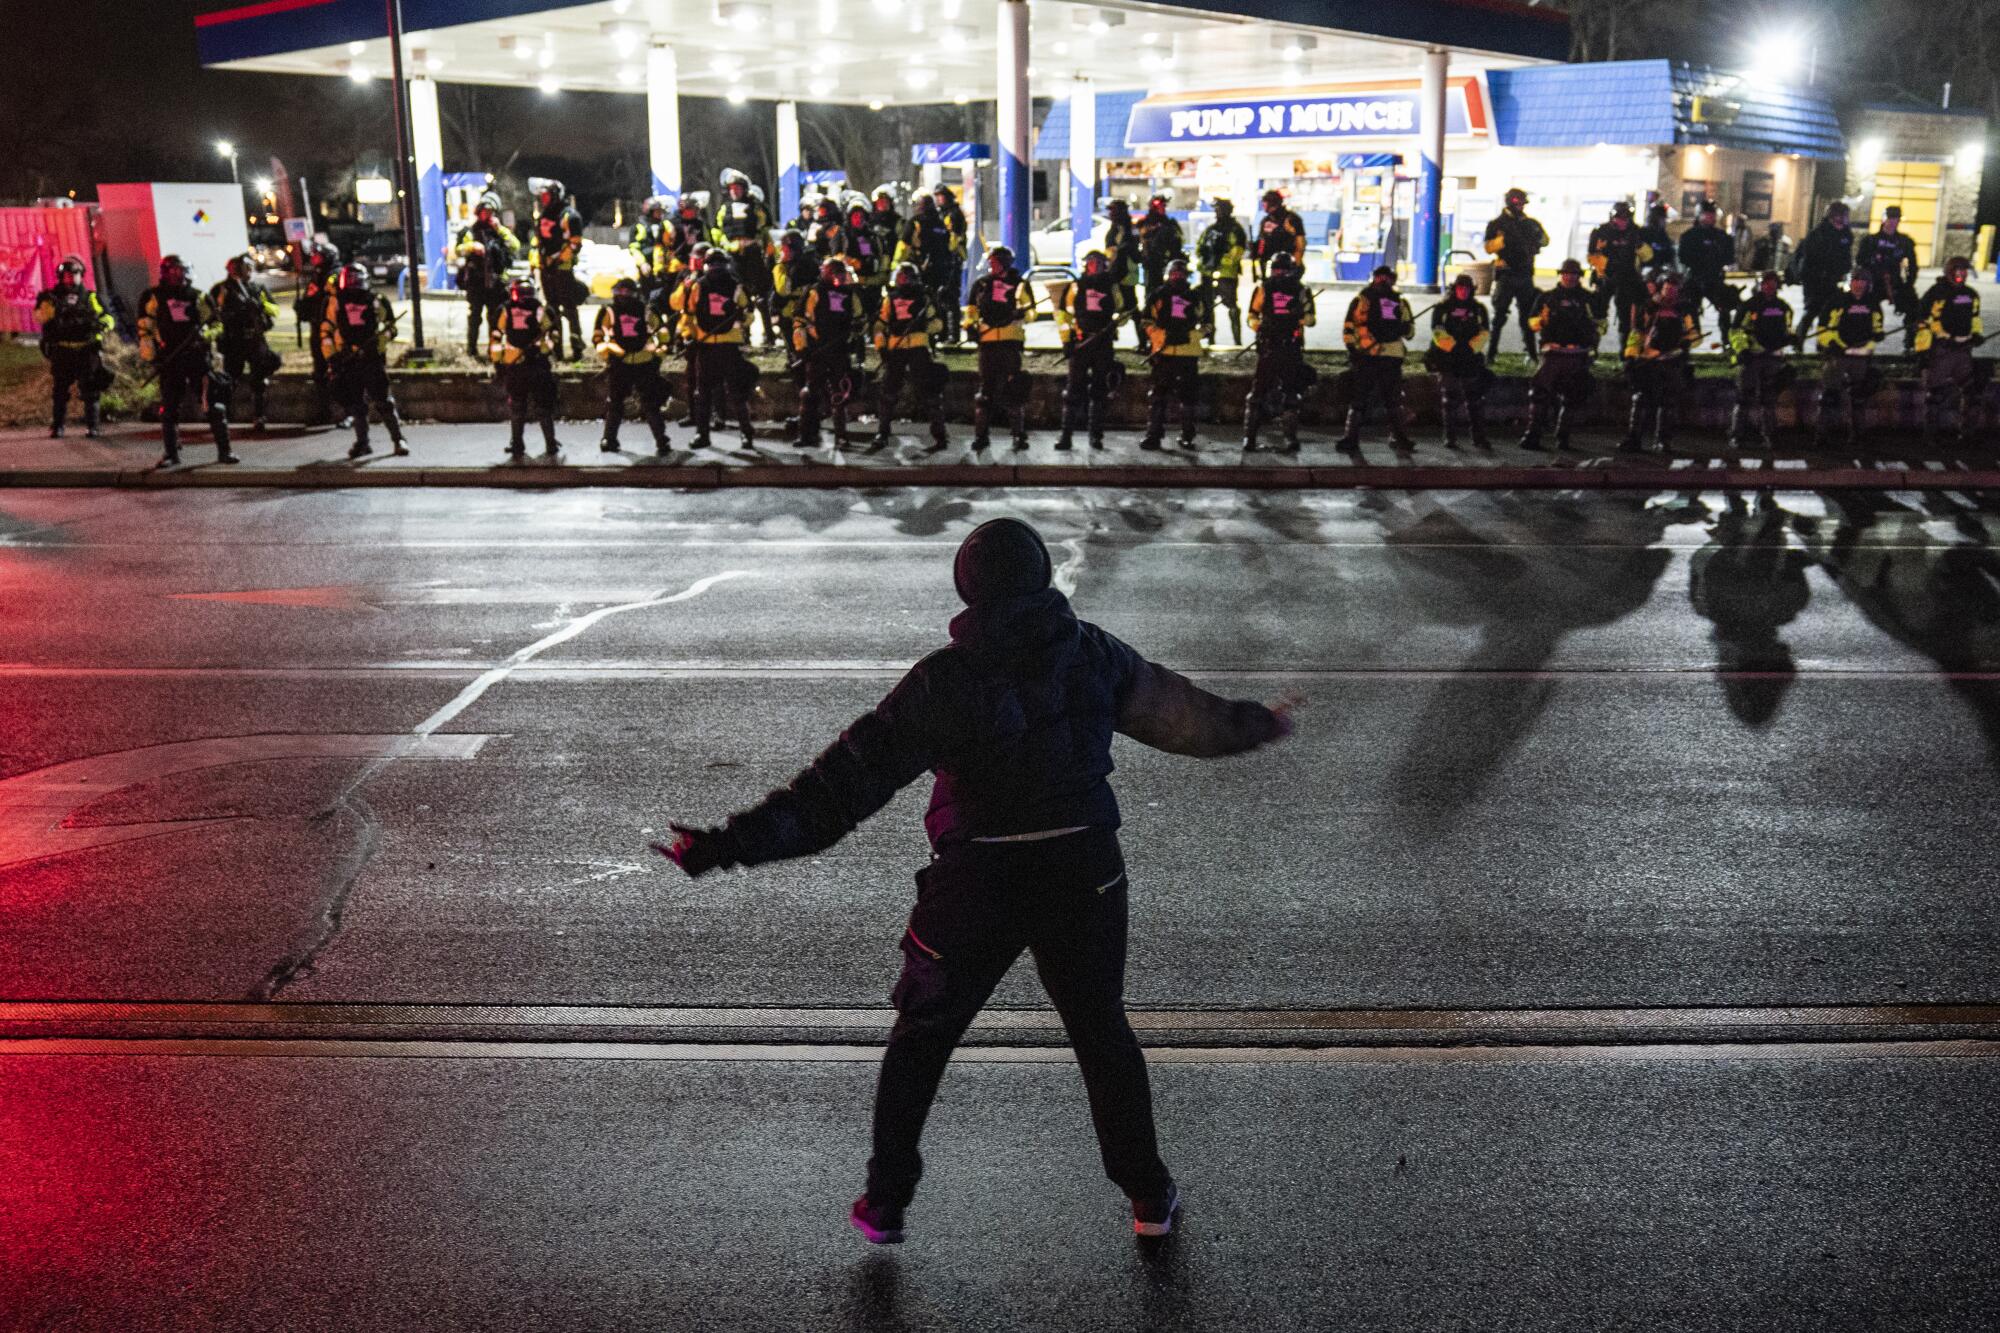 A protester is silhouetted against a line of police in front of a gas station